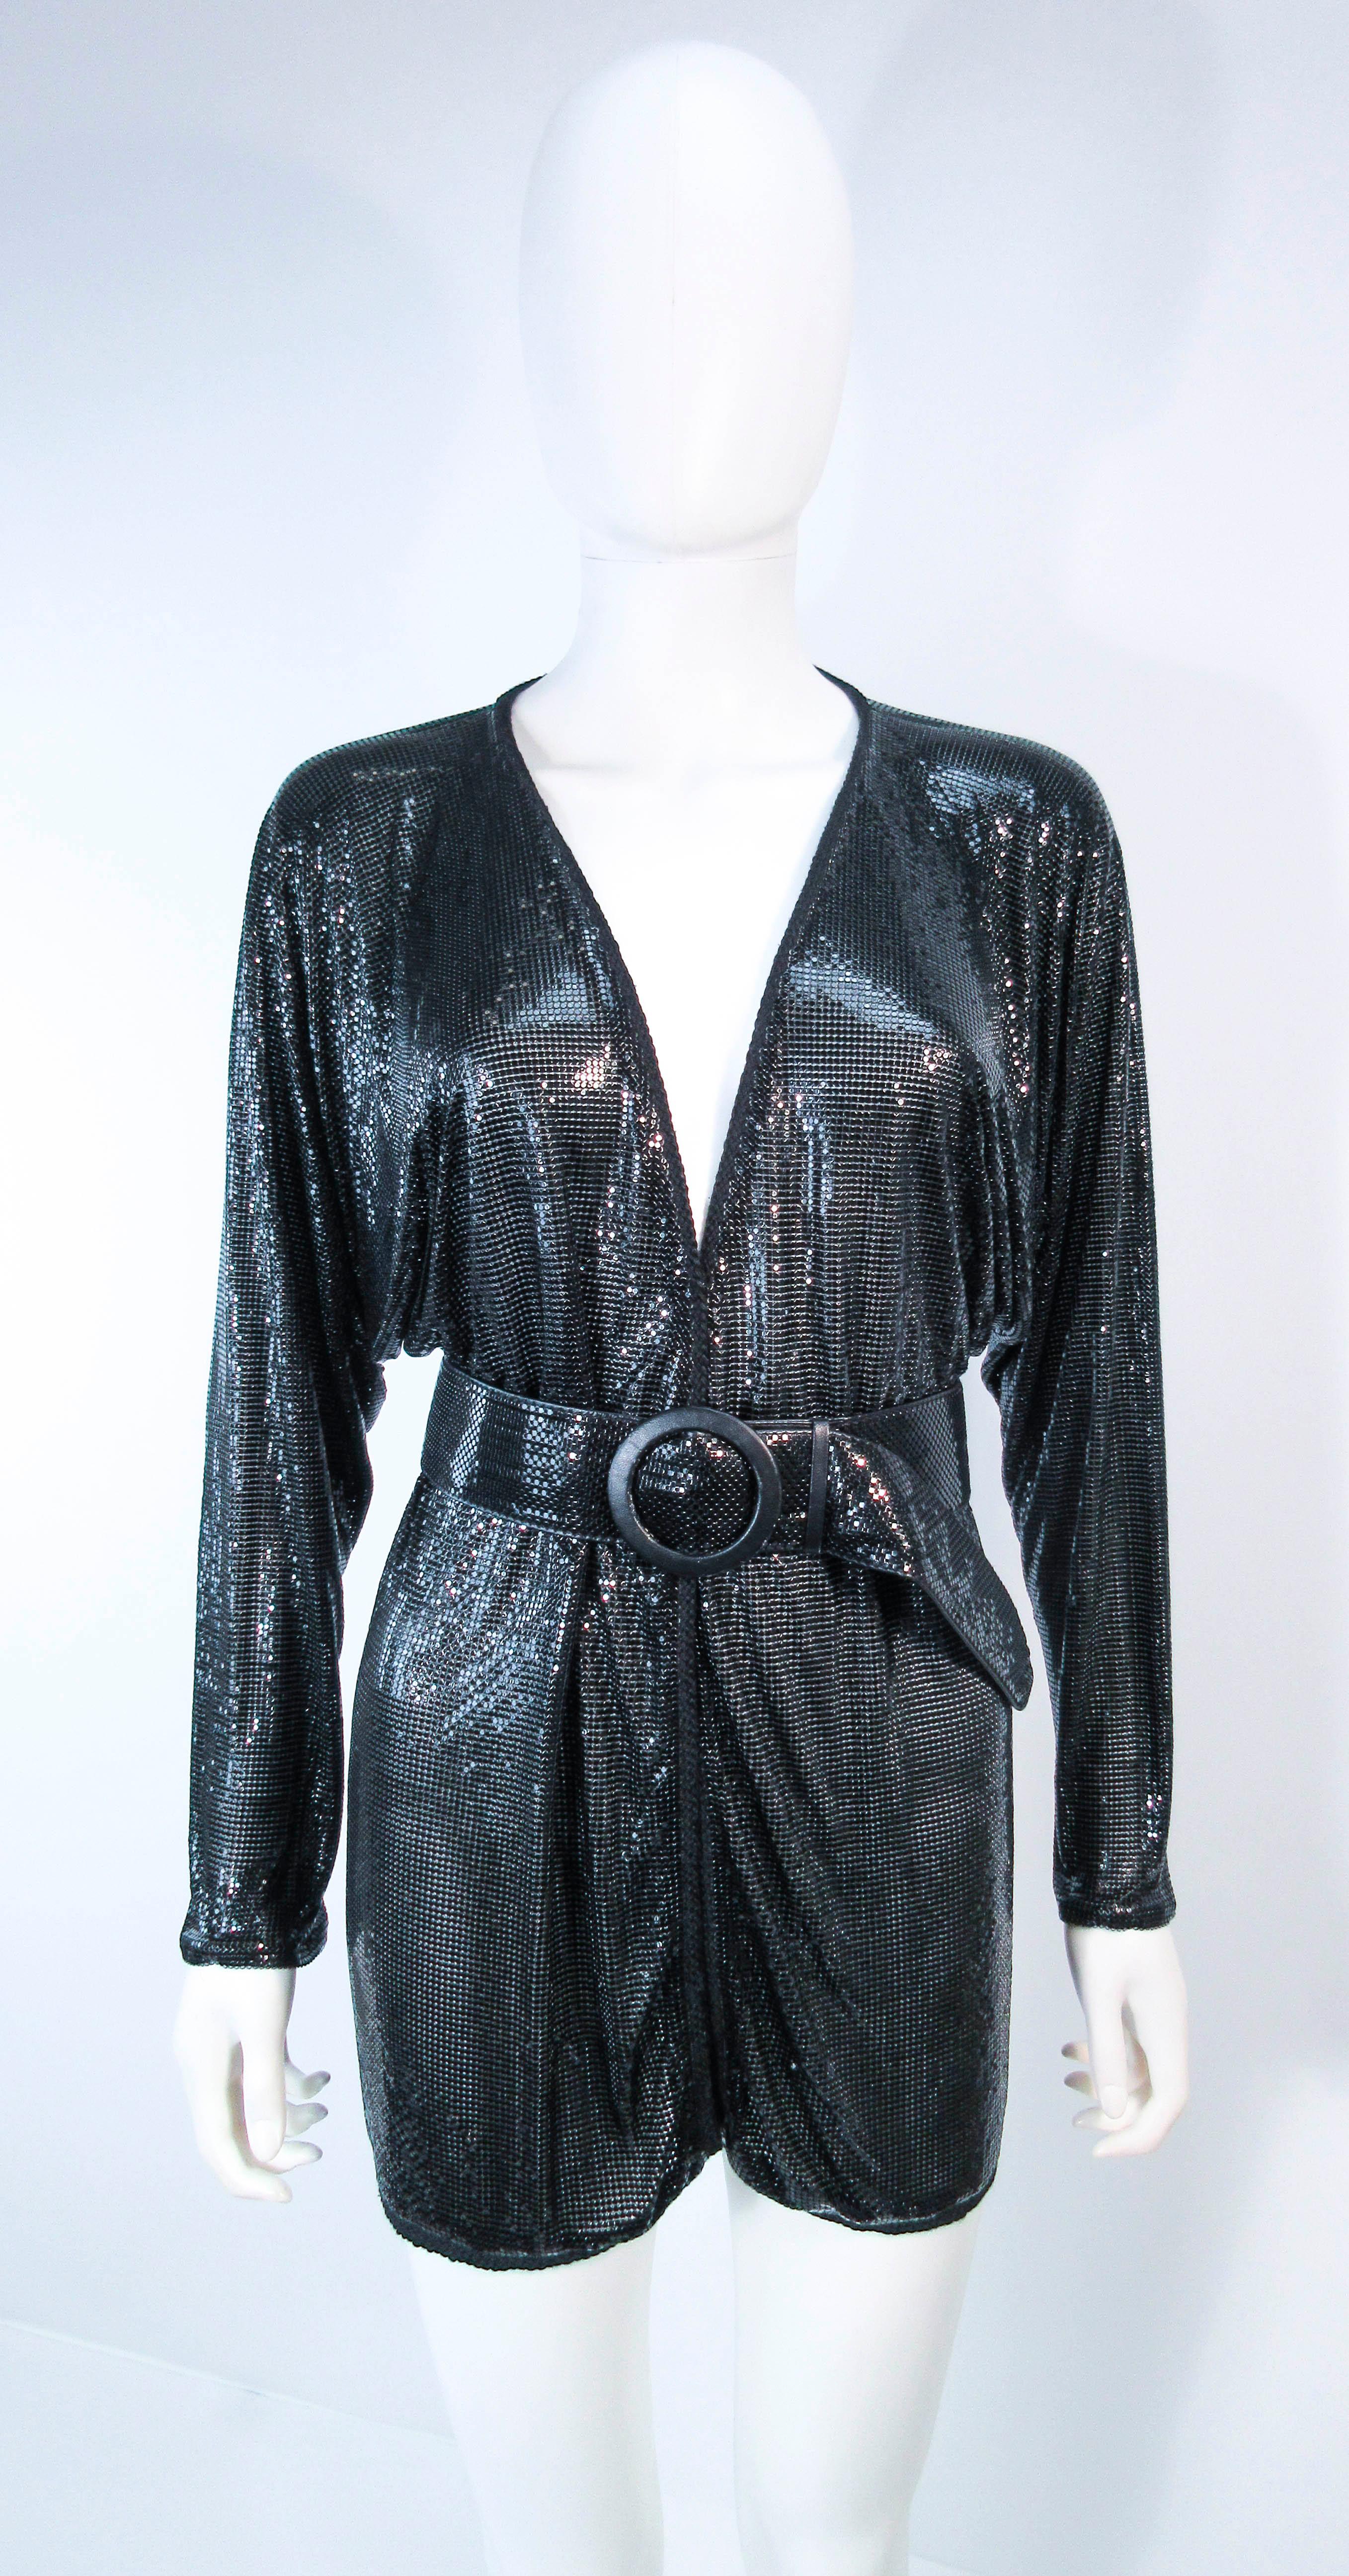 This Whiting and Davis design is composed of a black mesh. This item can be fashioned in variety of styles with or without the belt shown. Features center front hook & eyes with fabulous batwing sleeves.  In excellent vintage condition.

**Please